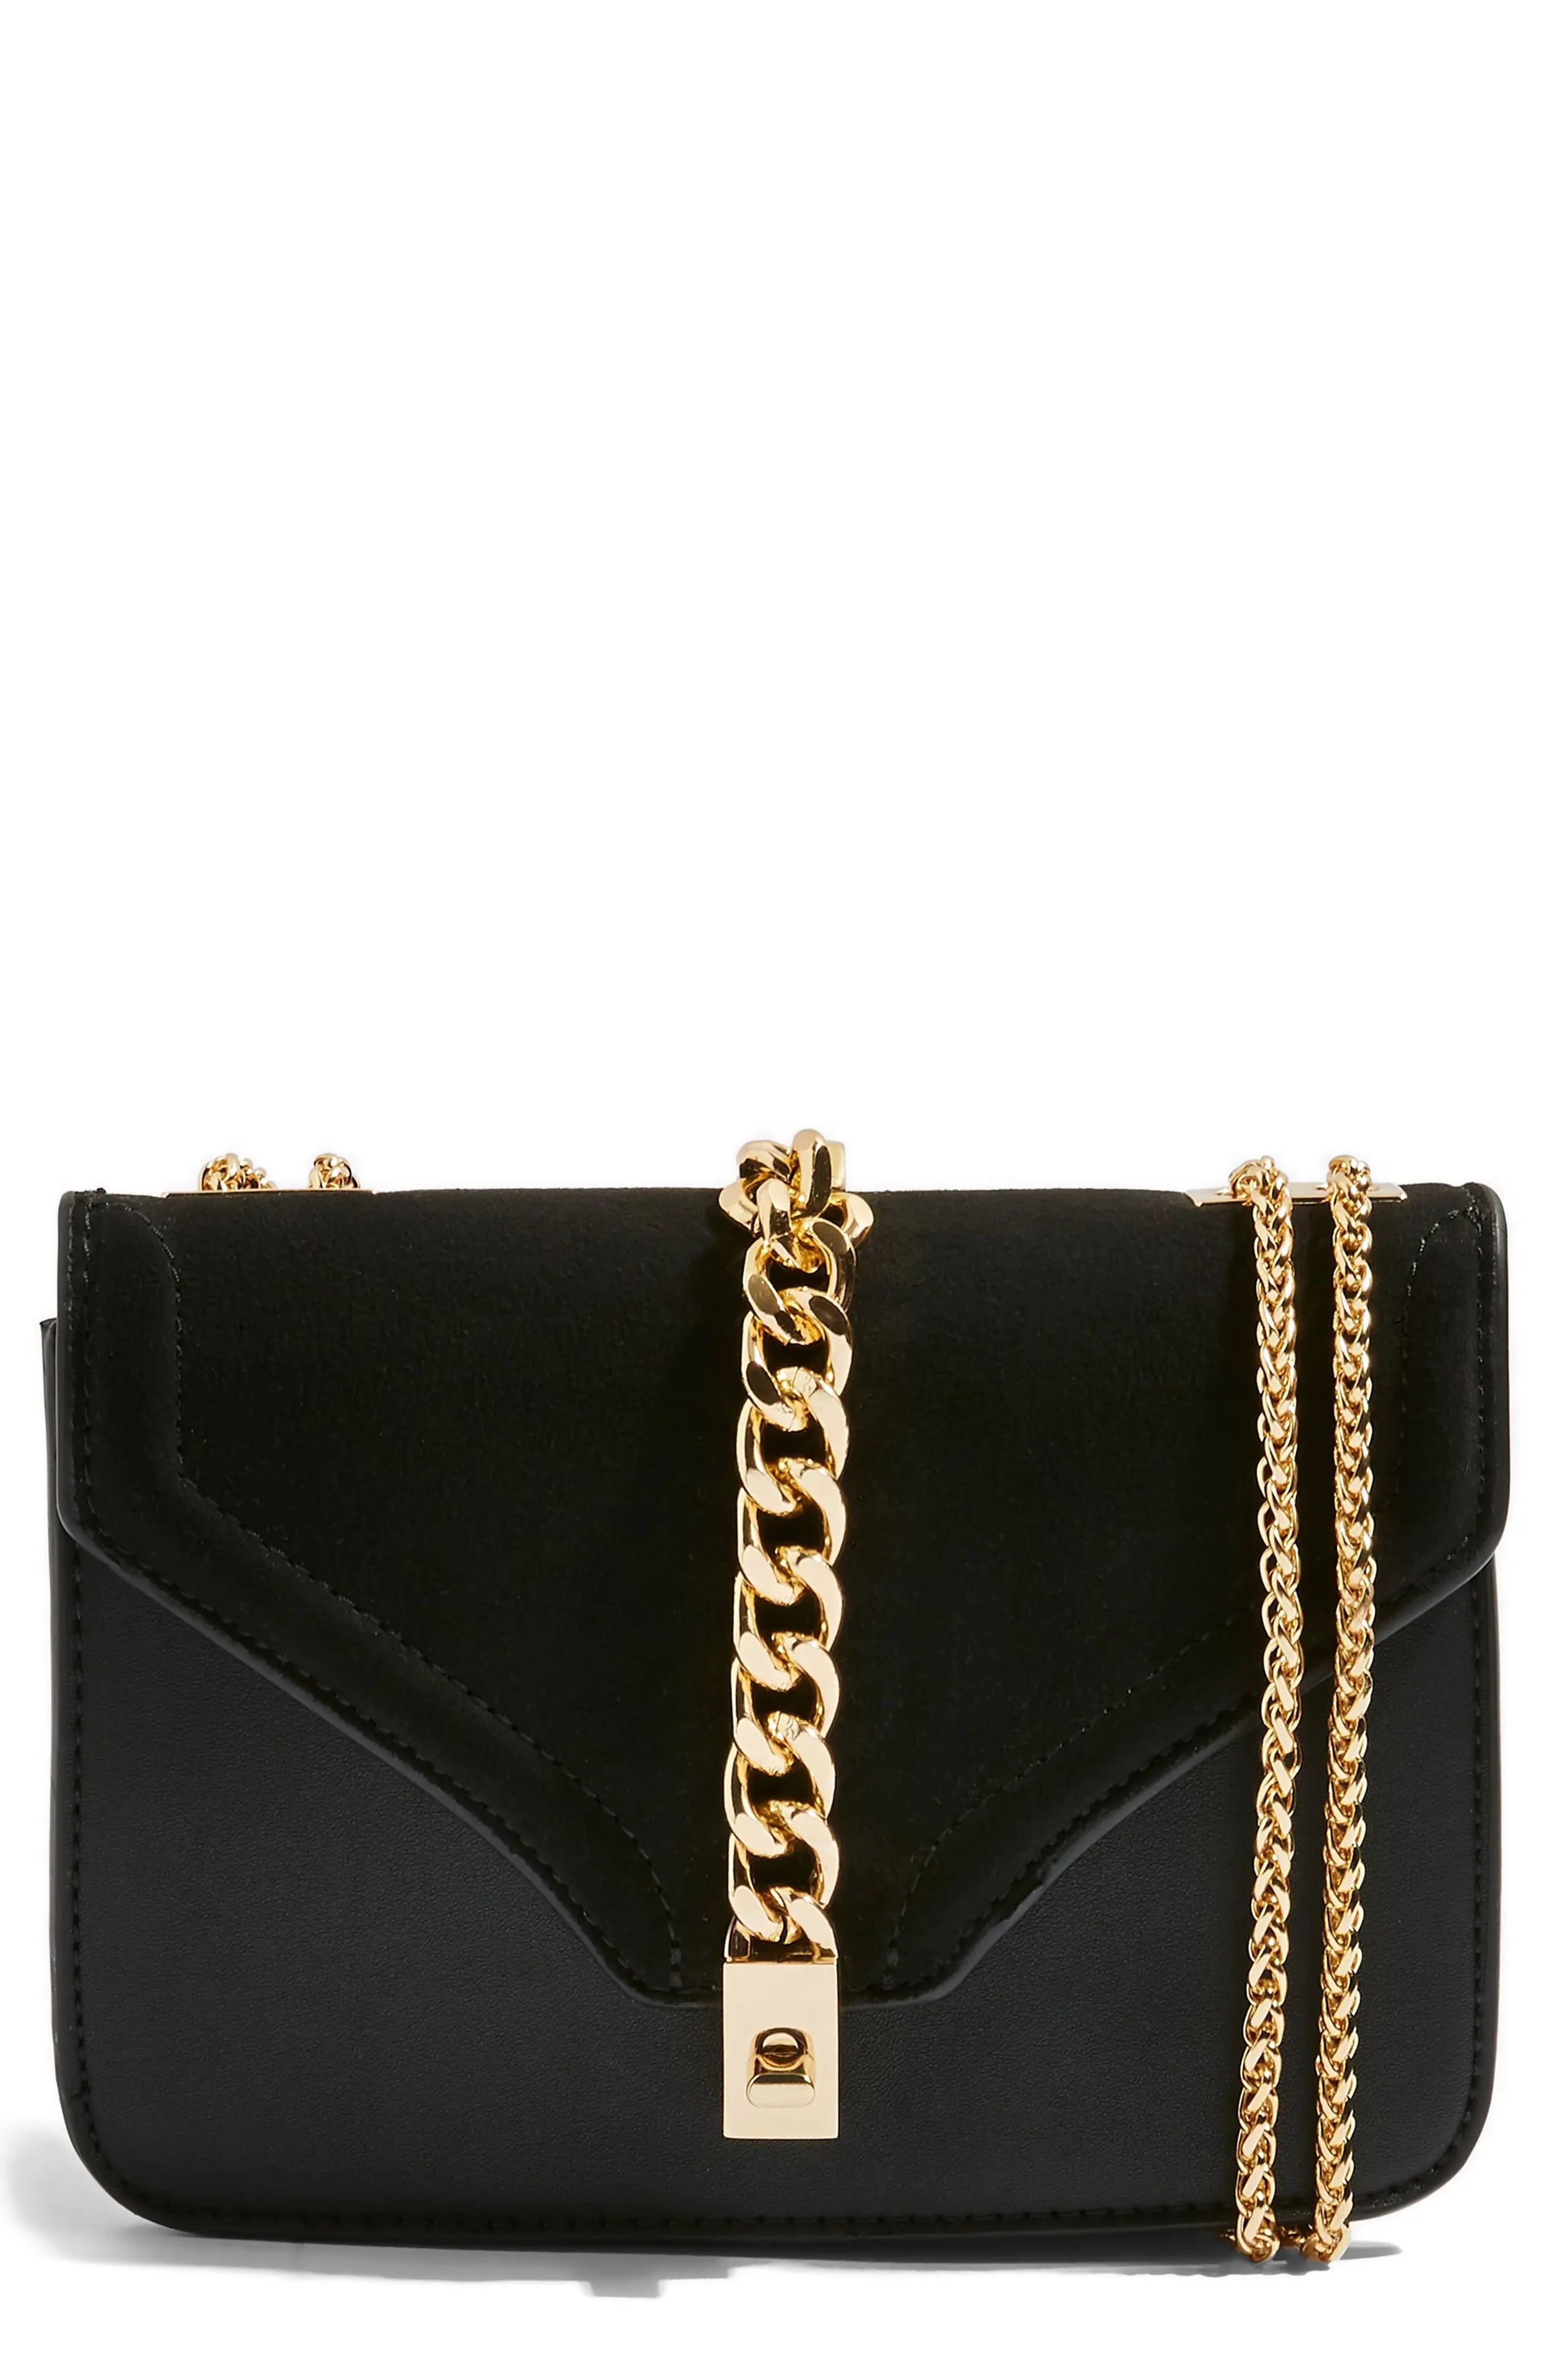 Topshop Daisy Chain Faux Leather Crossbody Bag | Nordstrom